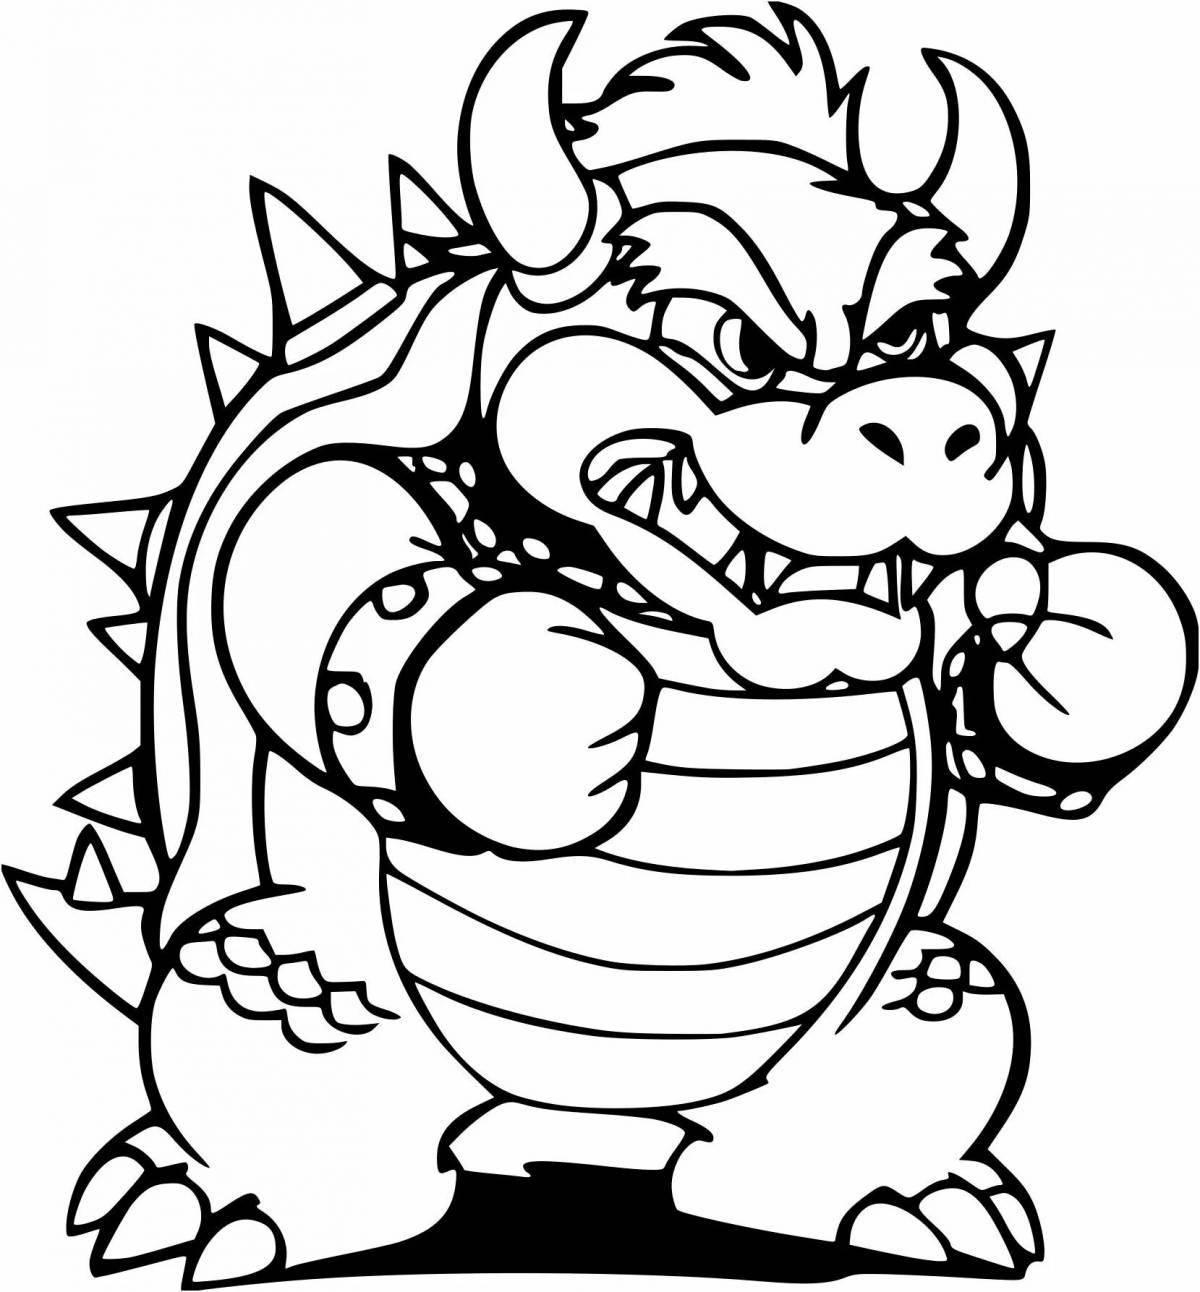 Colorful bowser coloring book